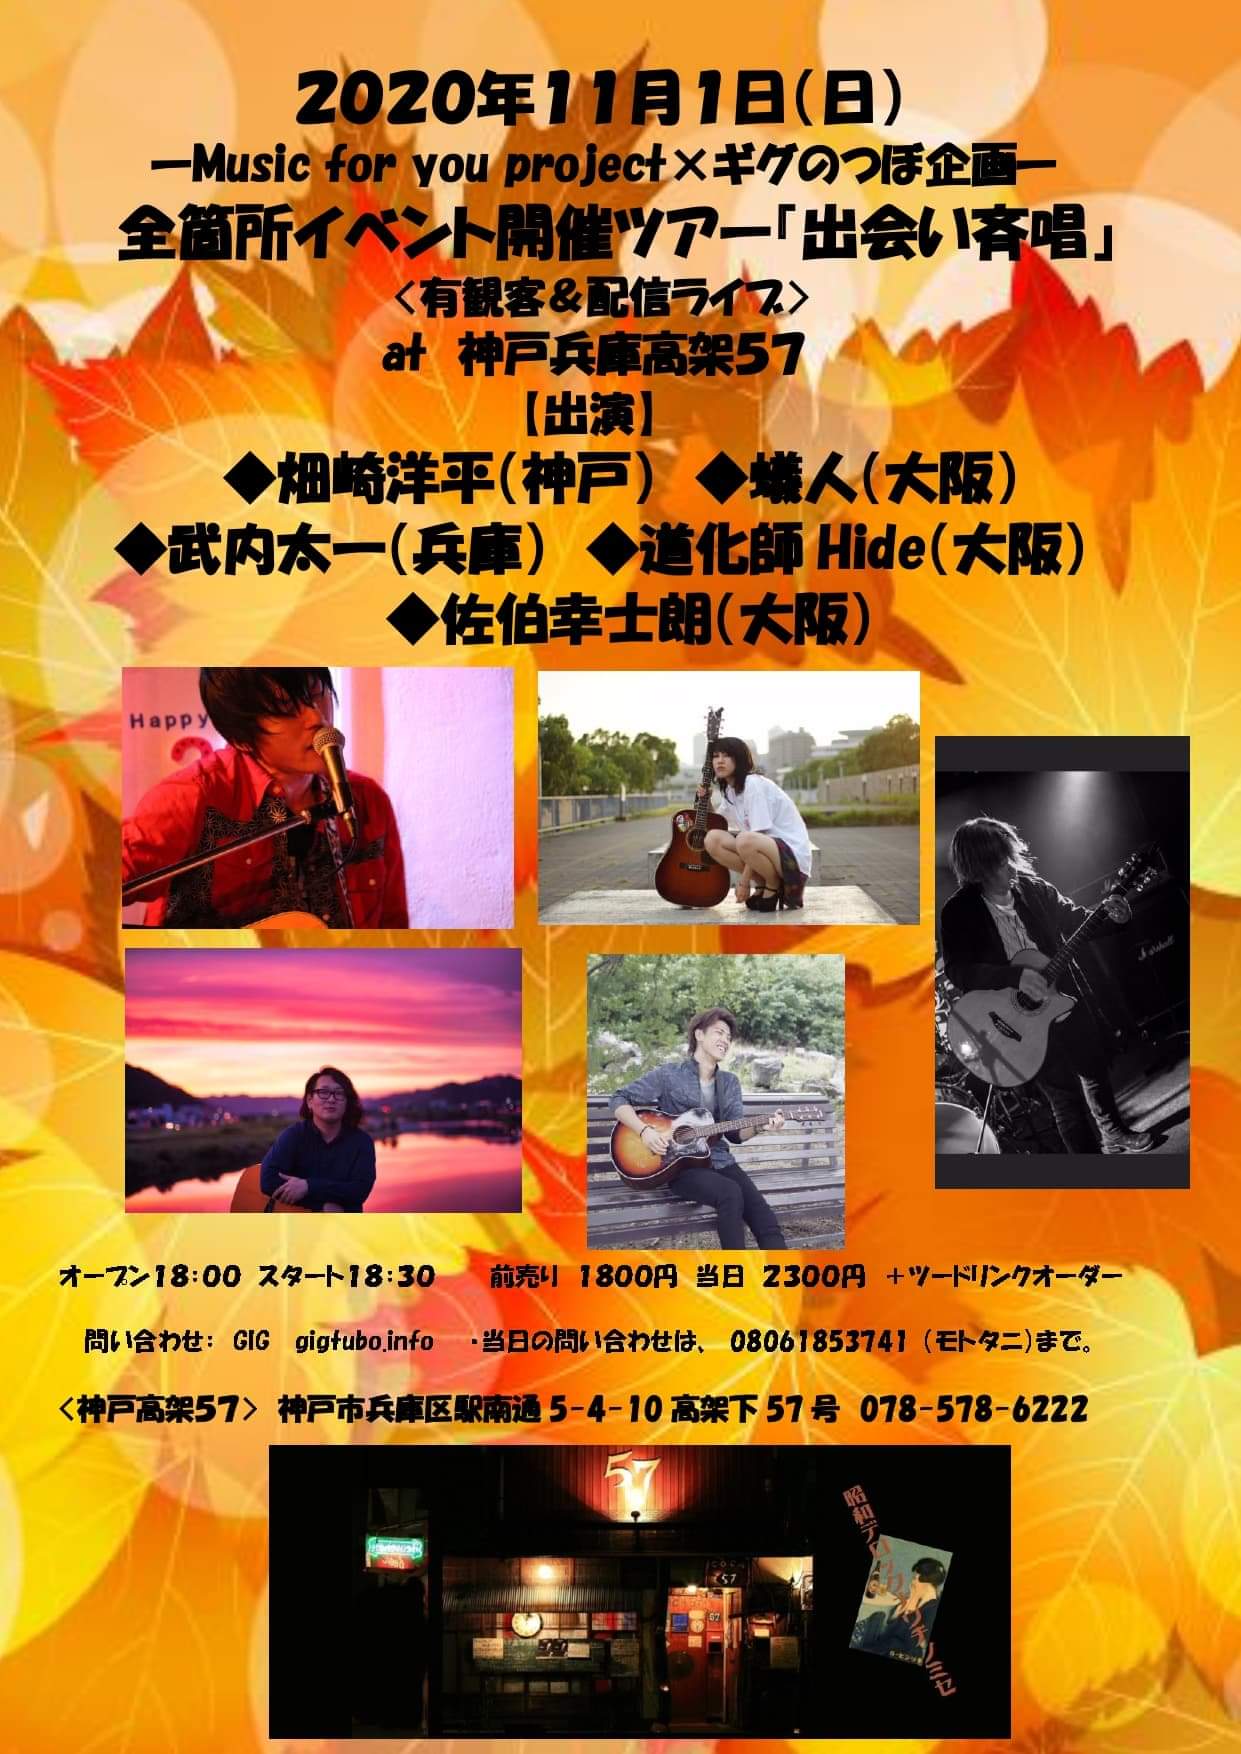 ーMusic for you project×ギグのつぼ企画ー　全箇所イベント開催ツアー『出会い斉唱』     2020/11/1(日) 18:00     神戸高架57     視聴はこちら！     https://twitcasting.tv/c:musicforyouproject?r7372     投げ銭はこちら！     https://passmarket.yahoo.co.jp/event/show/detail/01ase4118nwcq.htmlのつぼ企画 出会い斉唱18時オープン